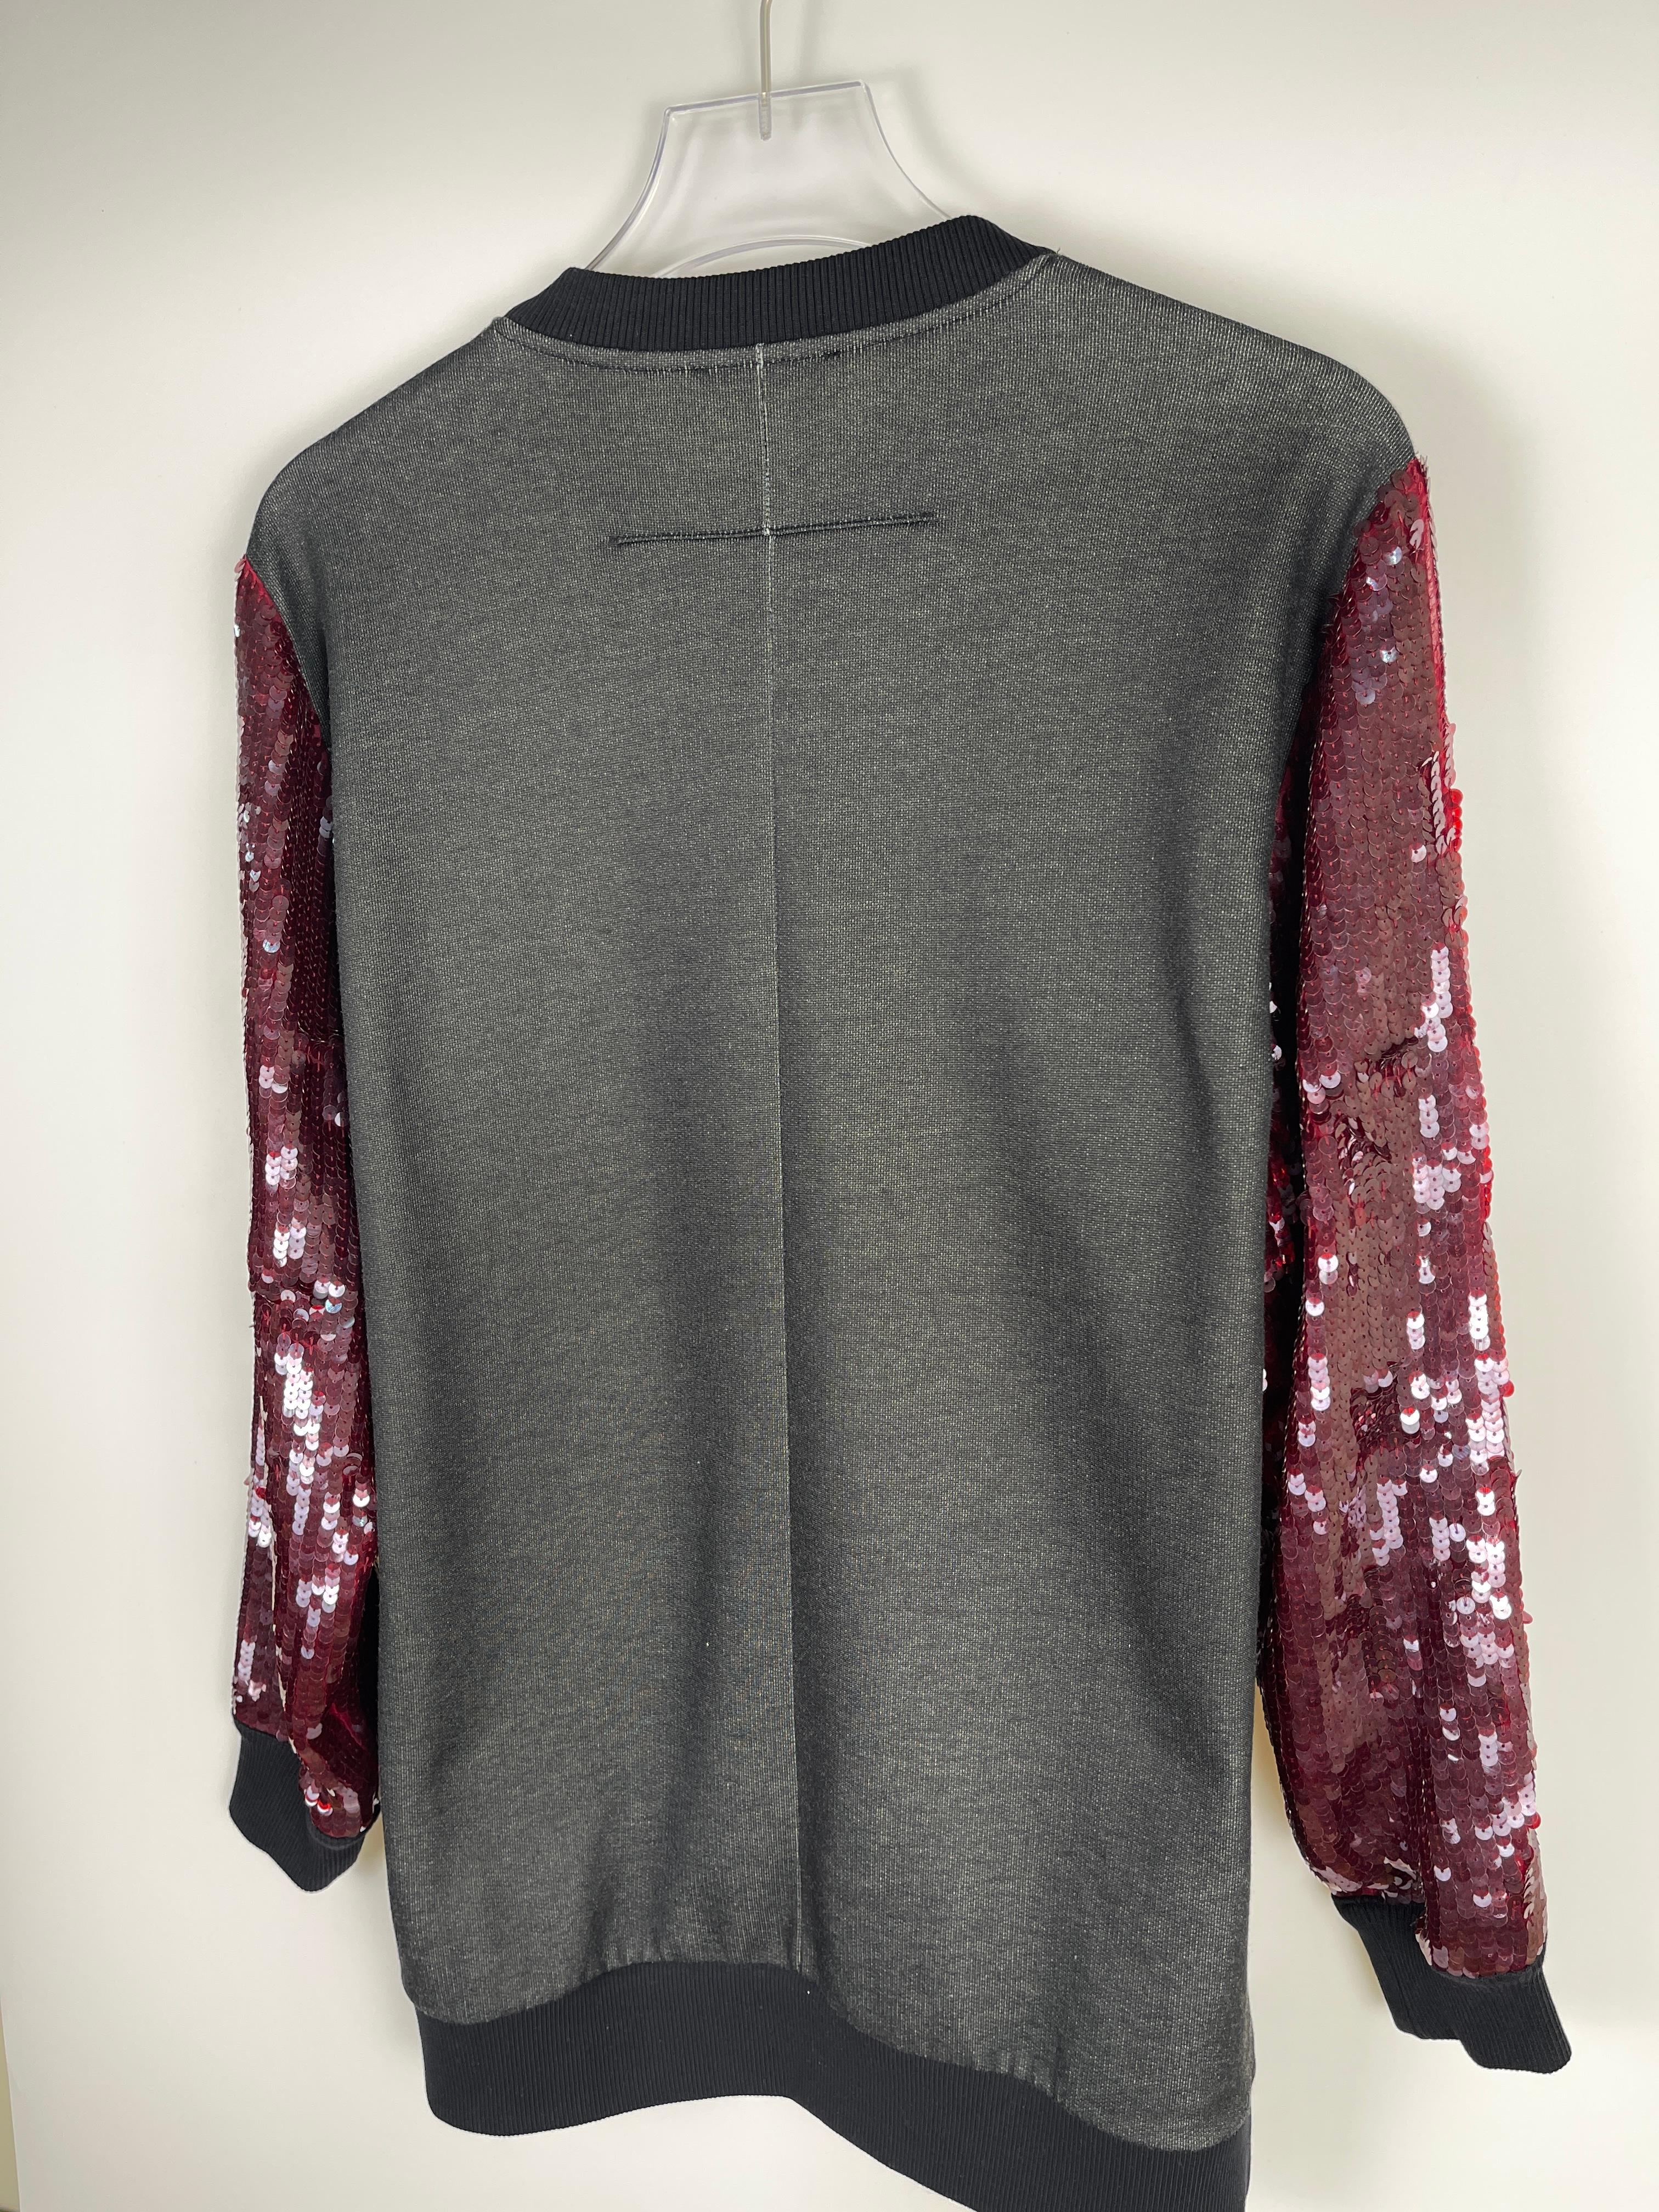 Givenchy F/W2013 Sequinn Ecstasy Sweatshirt In Excellent Condition For Sale In Seattle, WA